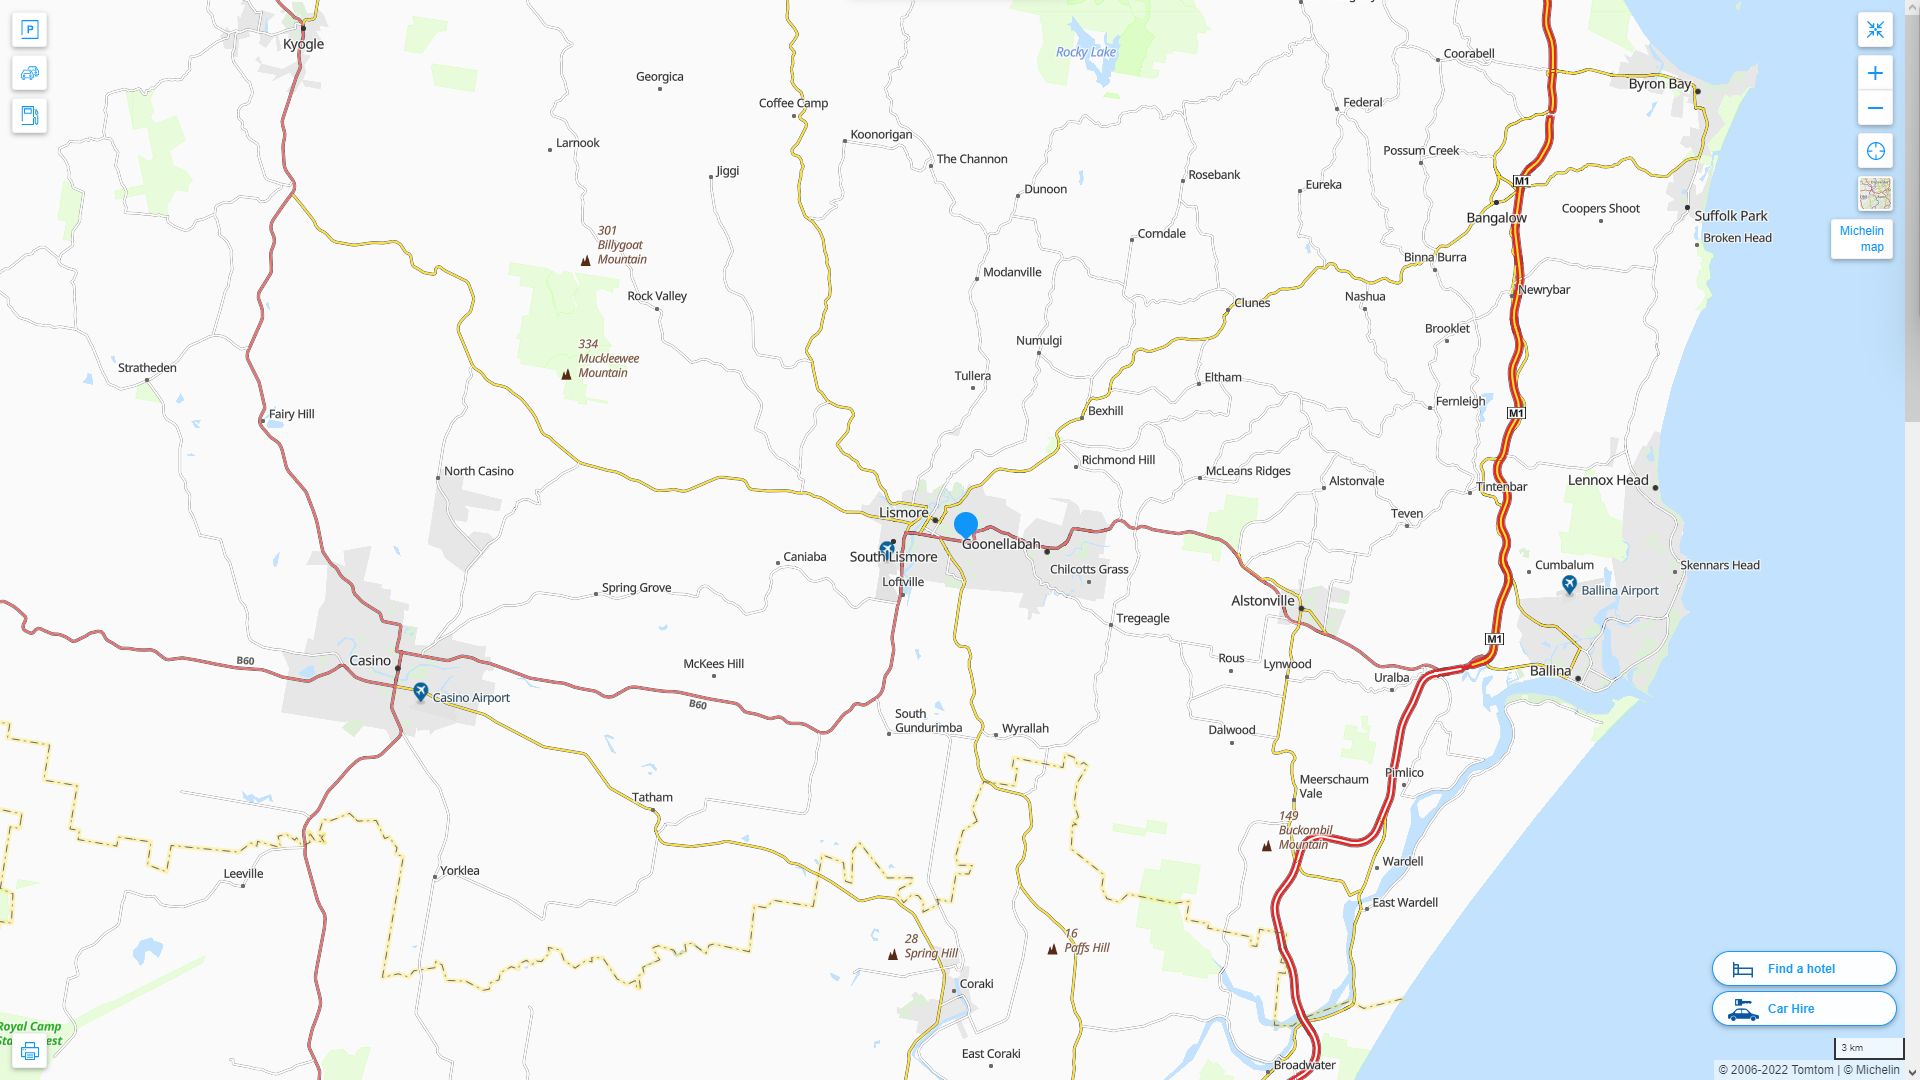 Lismore Highway and Road Map